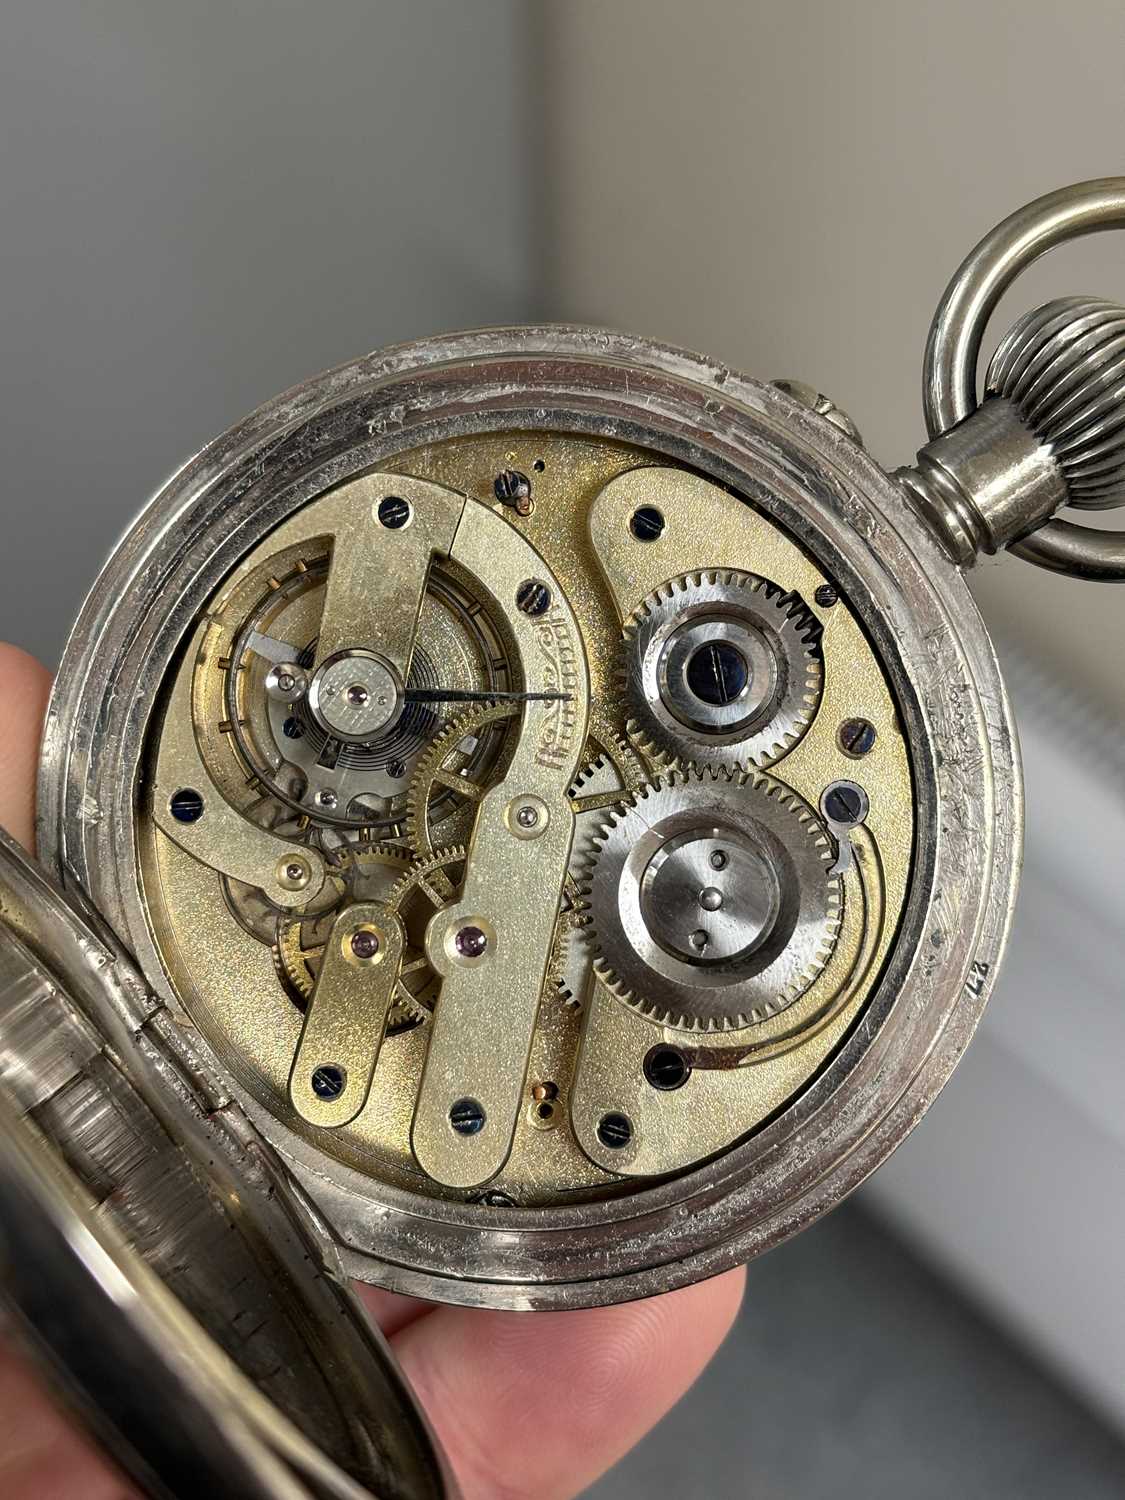 A VICTORIAN SILVER-MOUNTED GOLIATH POCKET WATCH CASE AND A SILVER-PLATED POCKET WATCH - Image 5 of 5